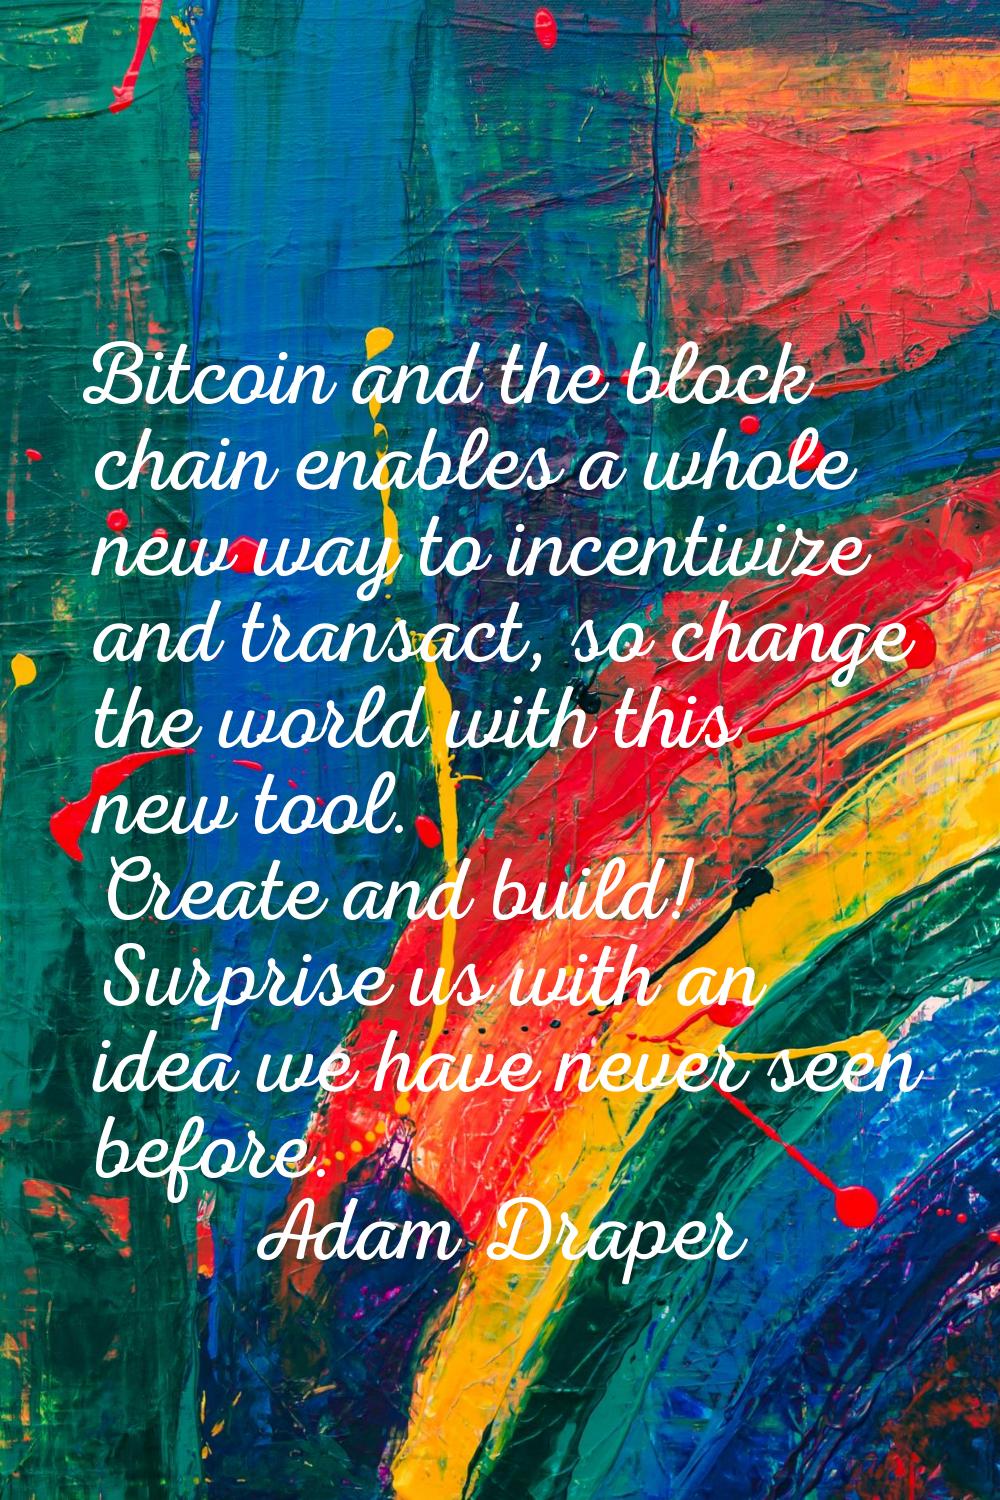 Bitcoin and the block chain enables a whole new way to incentivize and transact, so change the worl